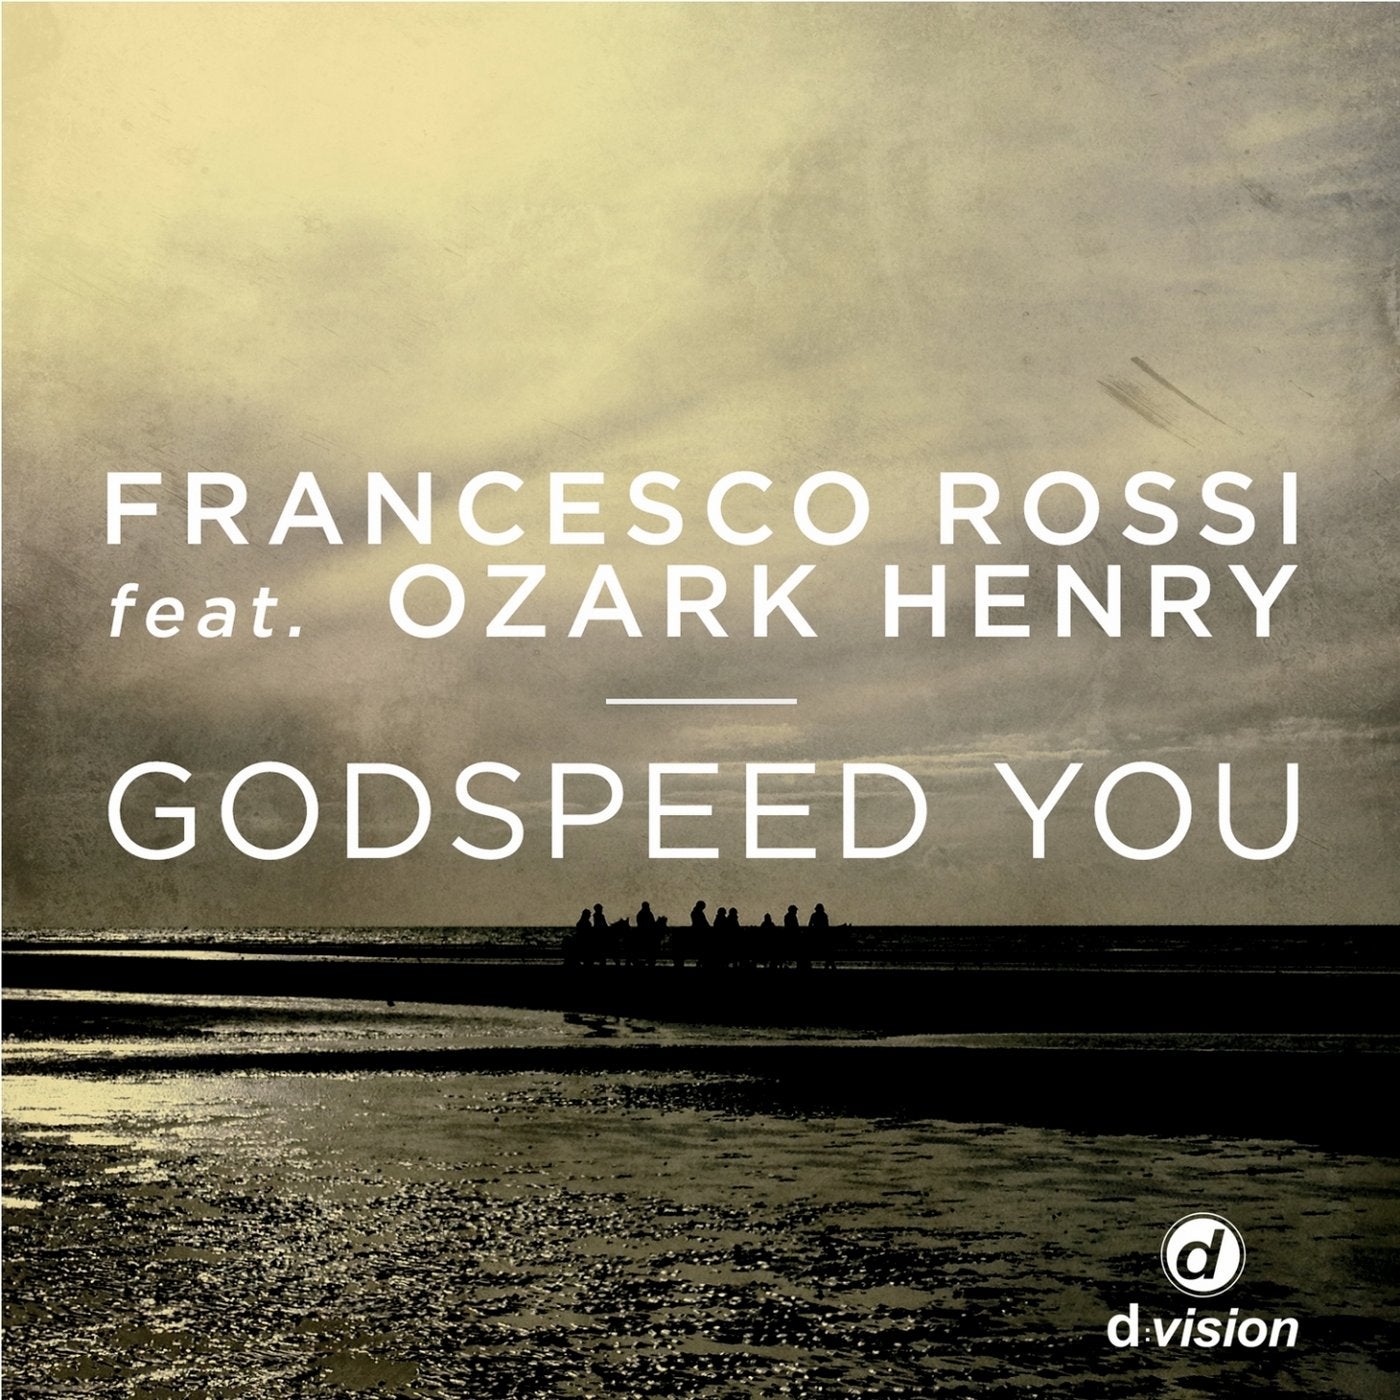 Godspeed You (feat. Ozark Henry) [Beatport Exclusive Extended Version]